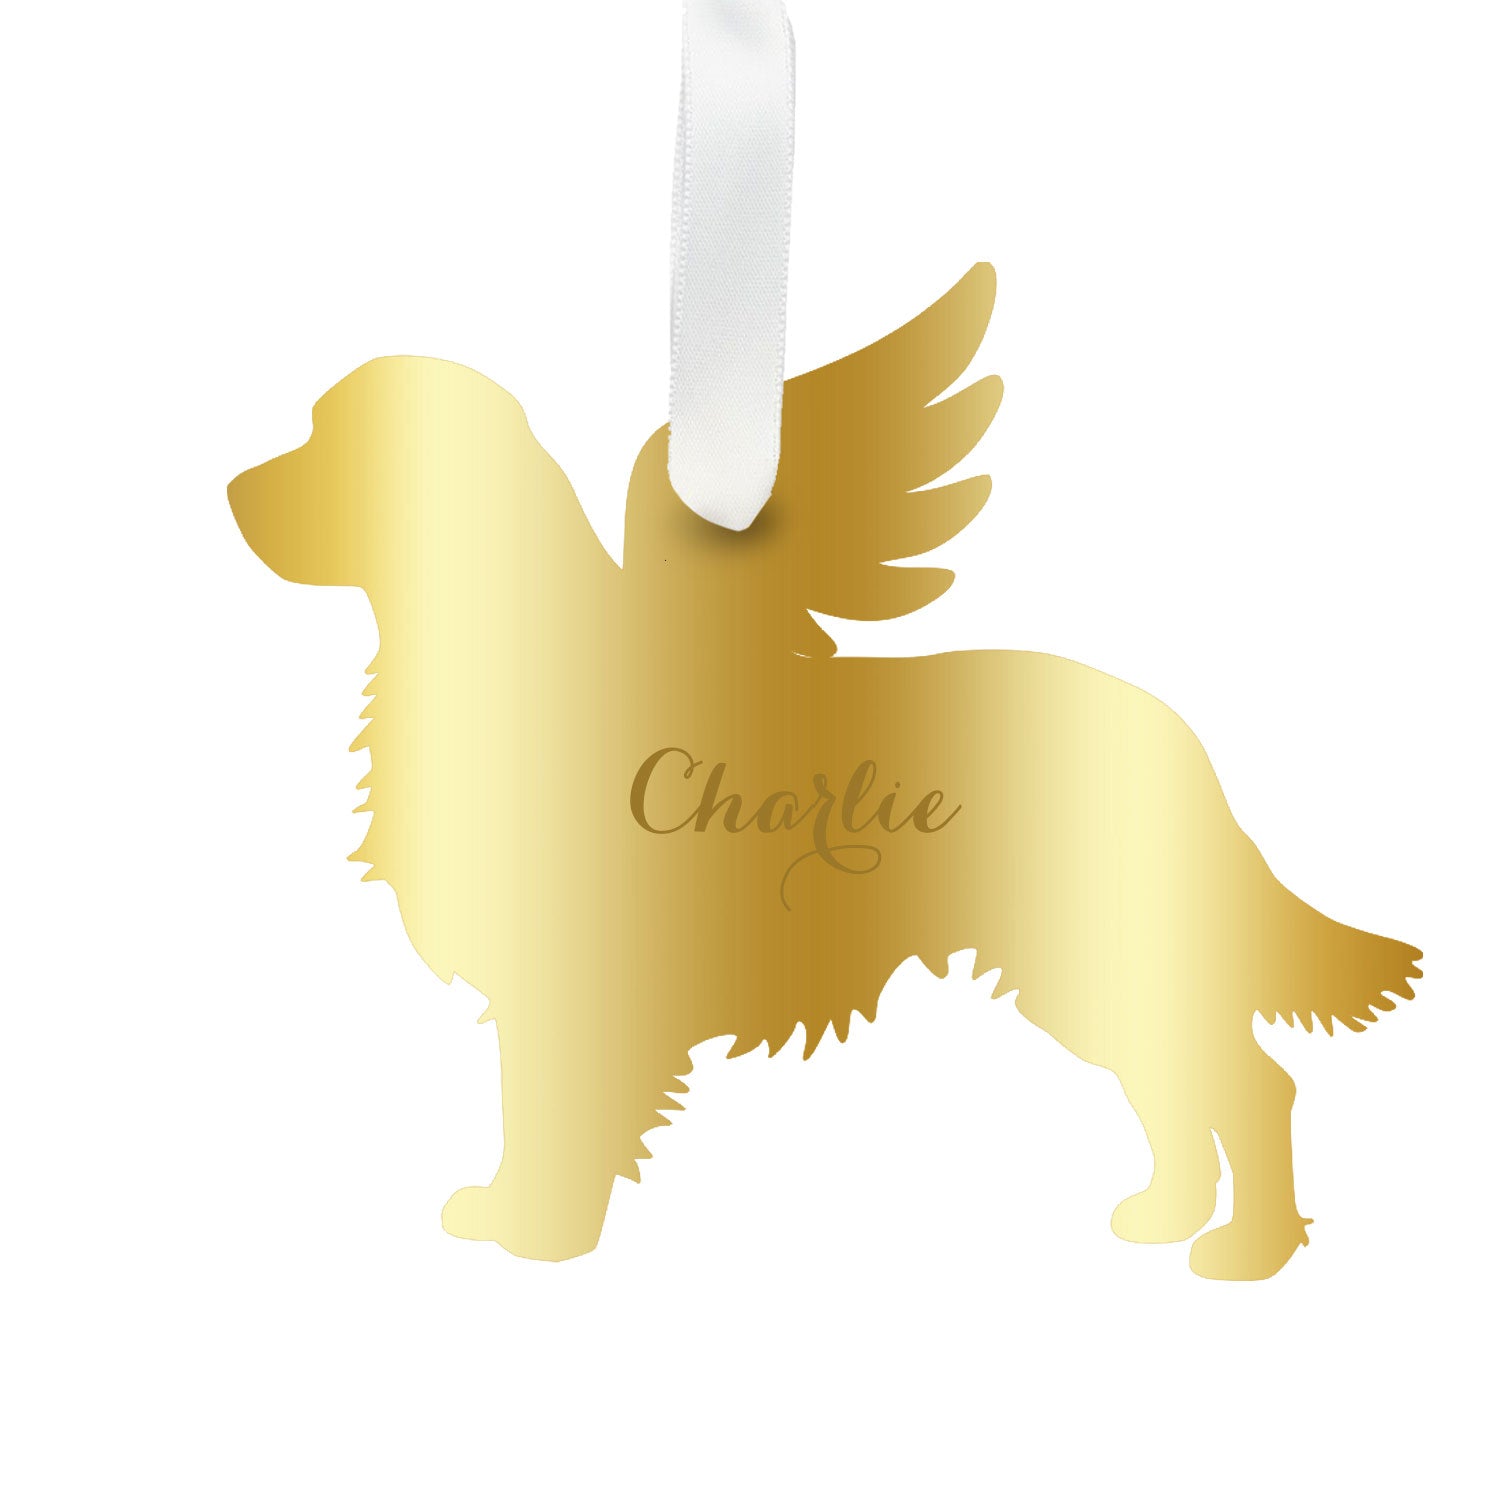 Moon and Lola - Personalized Angel Golden Retriever Ornament with wings in gold